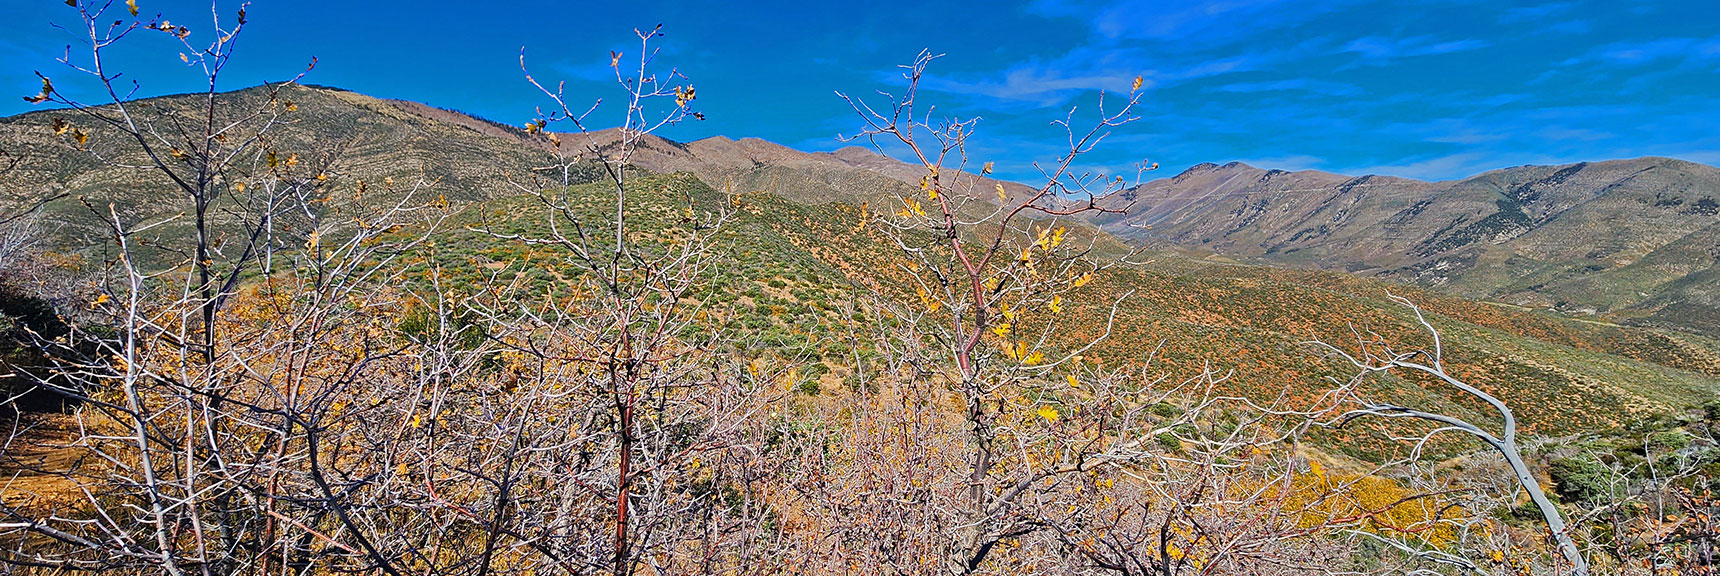 Note How the Gamble's Oak at This Elevation Thinks It's Winter vs. Colorful Fall Leaves on Trail Below. | Griffith Shadow Loop | Lovell Canyon, Nevada